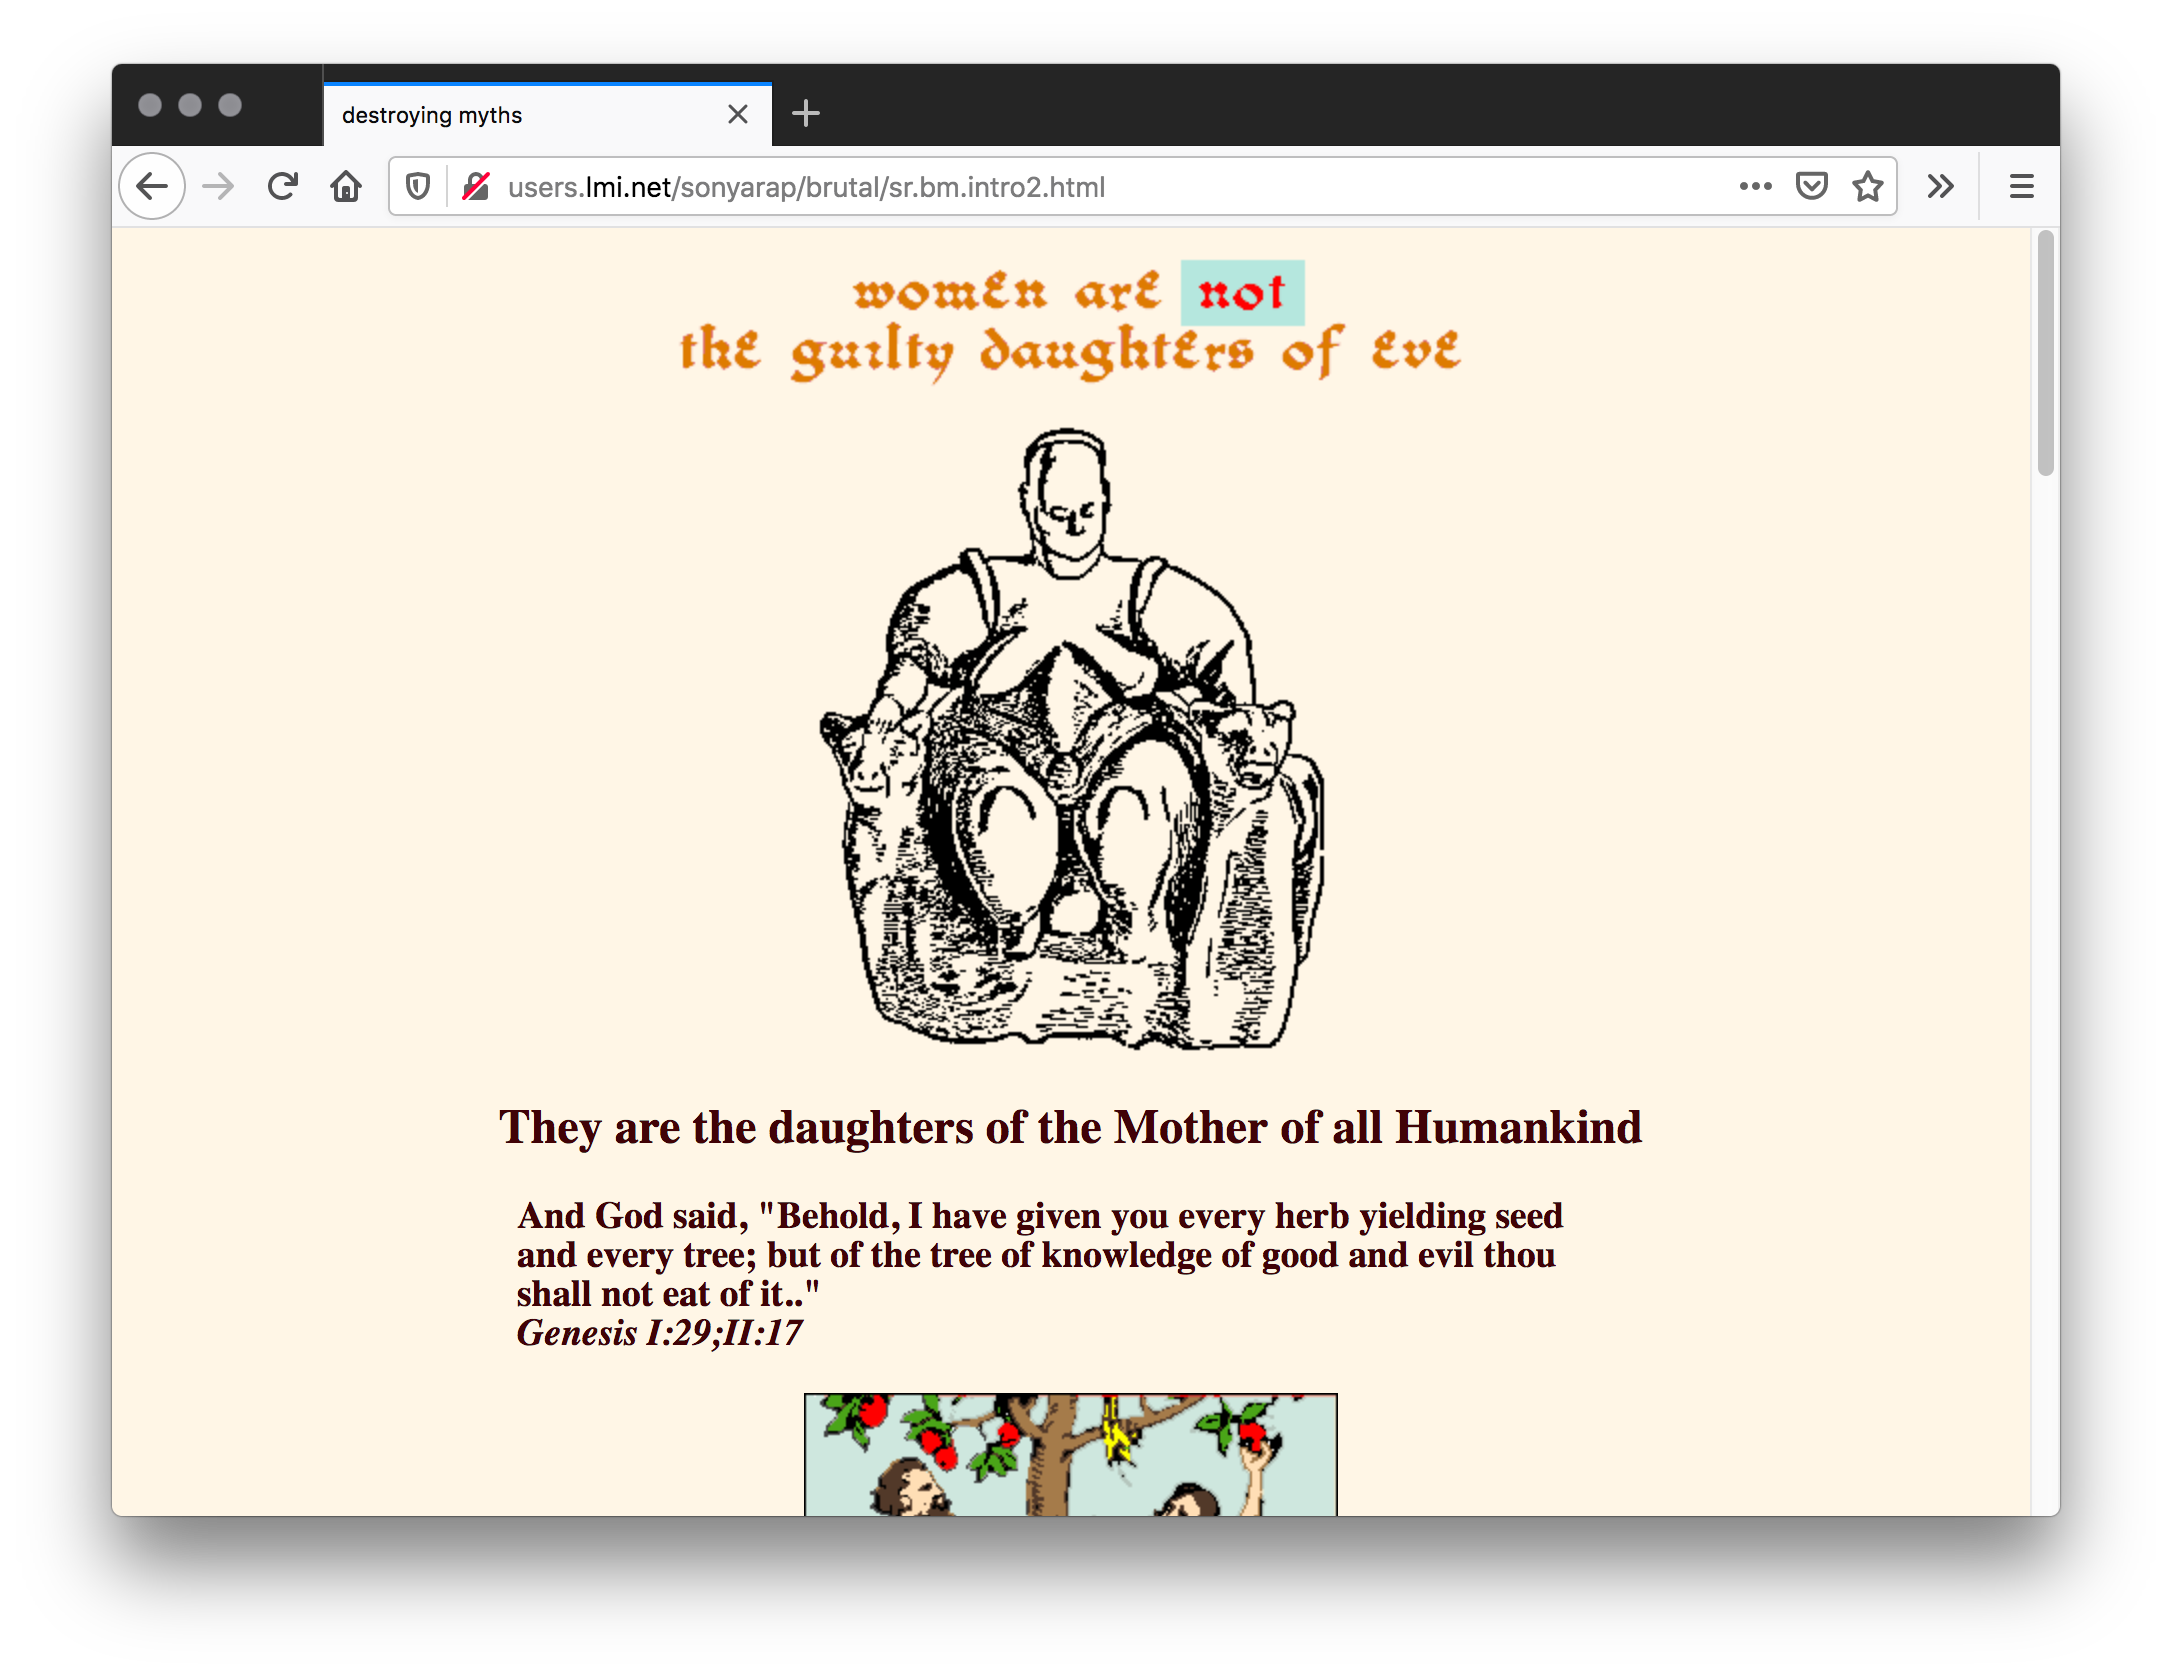 Webpage with light peach background. A cartoon graphic of a chubby woman statue sits on a chair. On the bottom is cut off colored graphic cartoon of Adam and Eve taking an apple from the Tree of Knowledge with the serpent slithering its way to Eve.